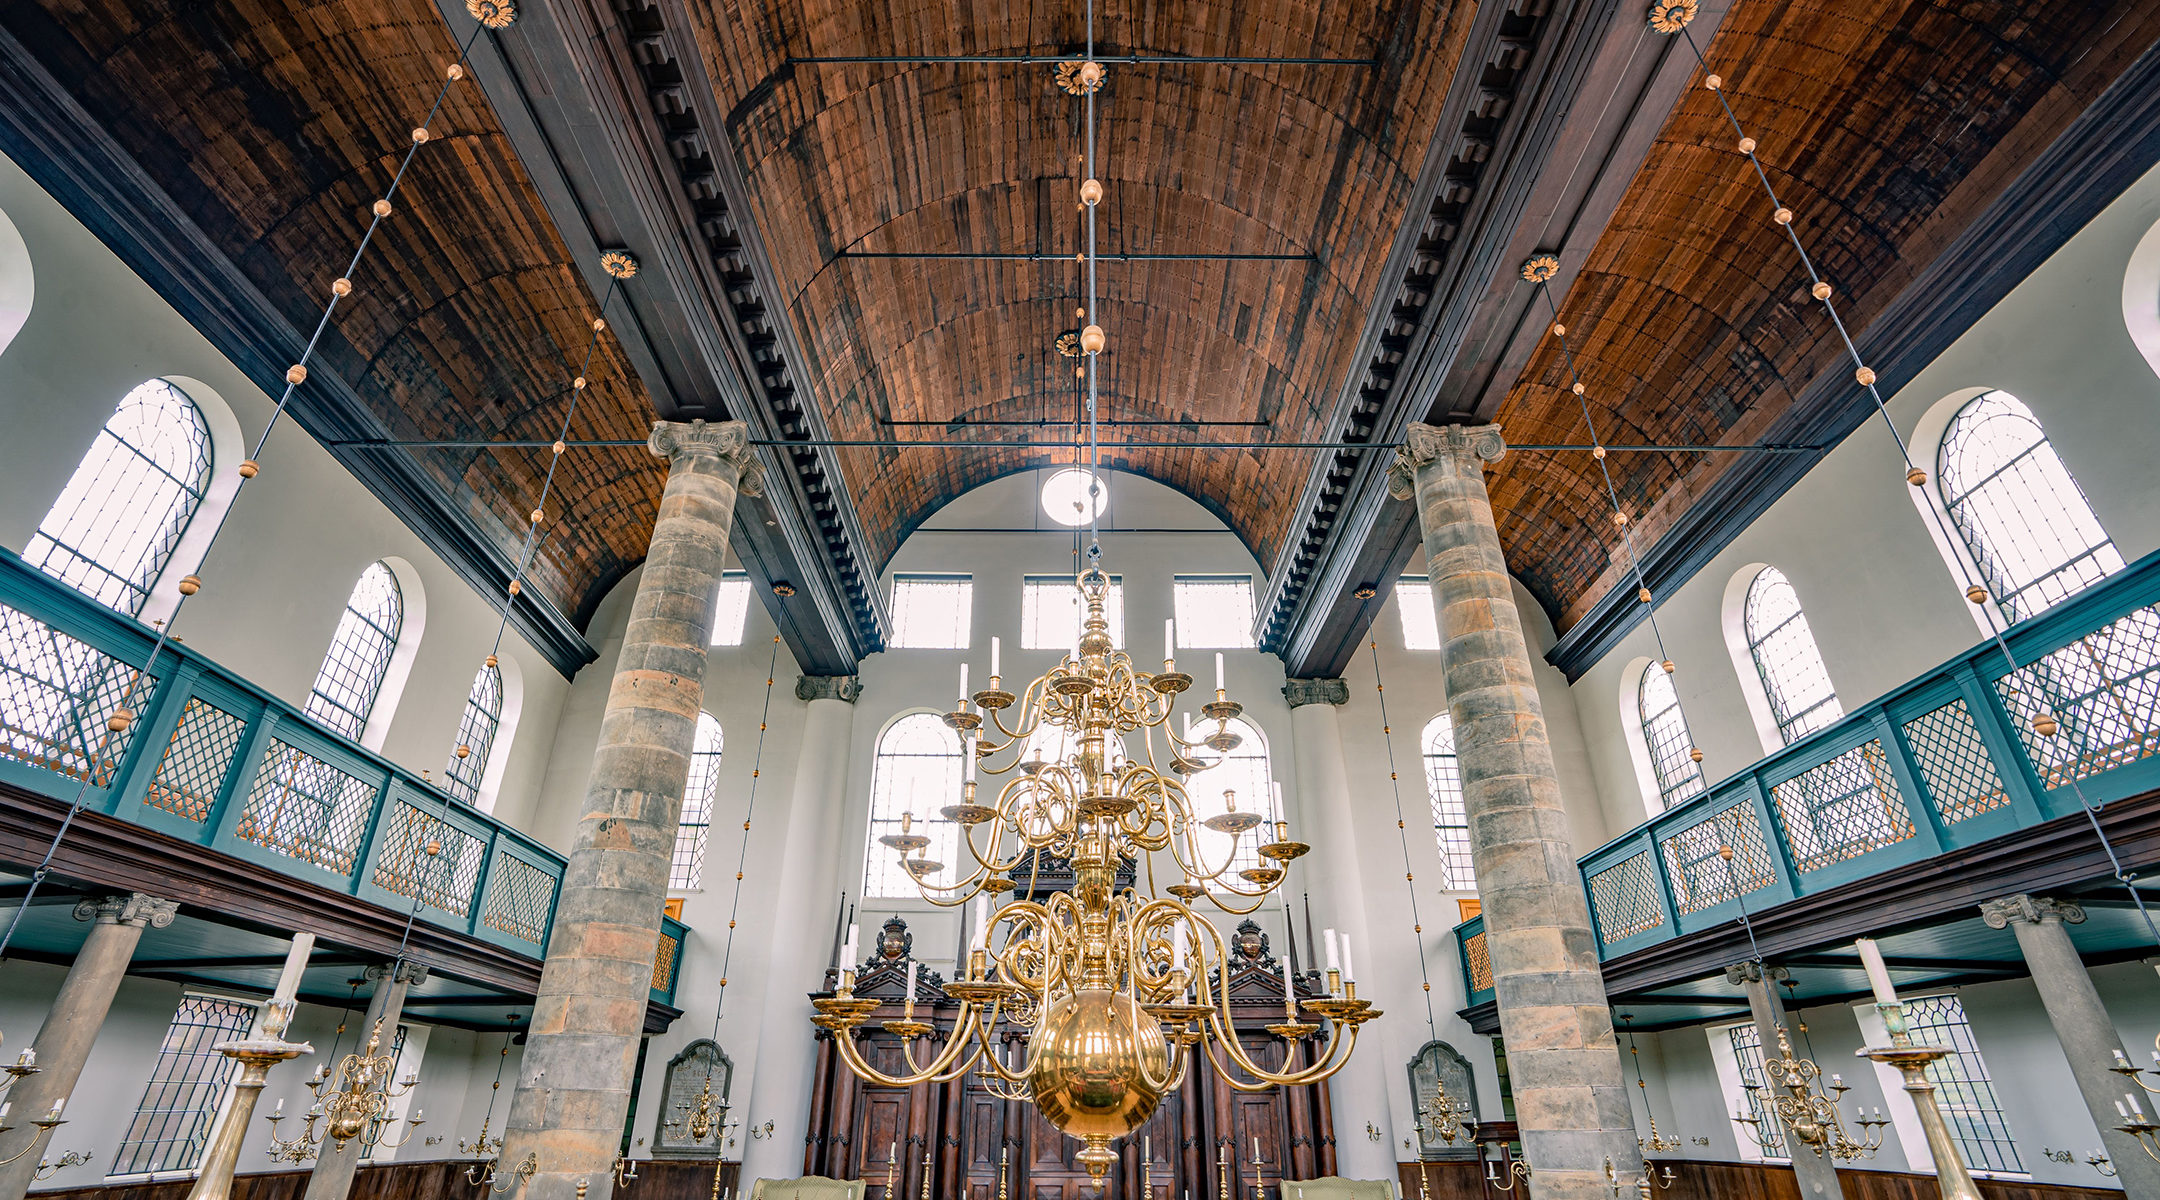 The interior of the Portuguese Synagogue in Amsterdam, the Netherlands. (Bas de Brouwer)